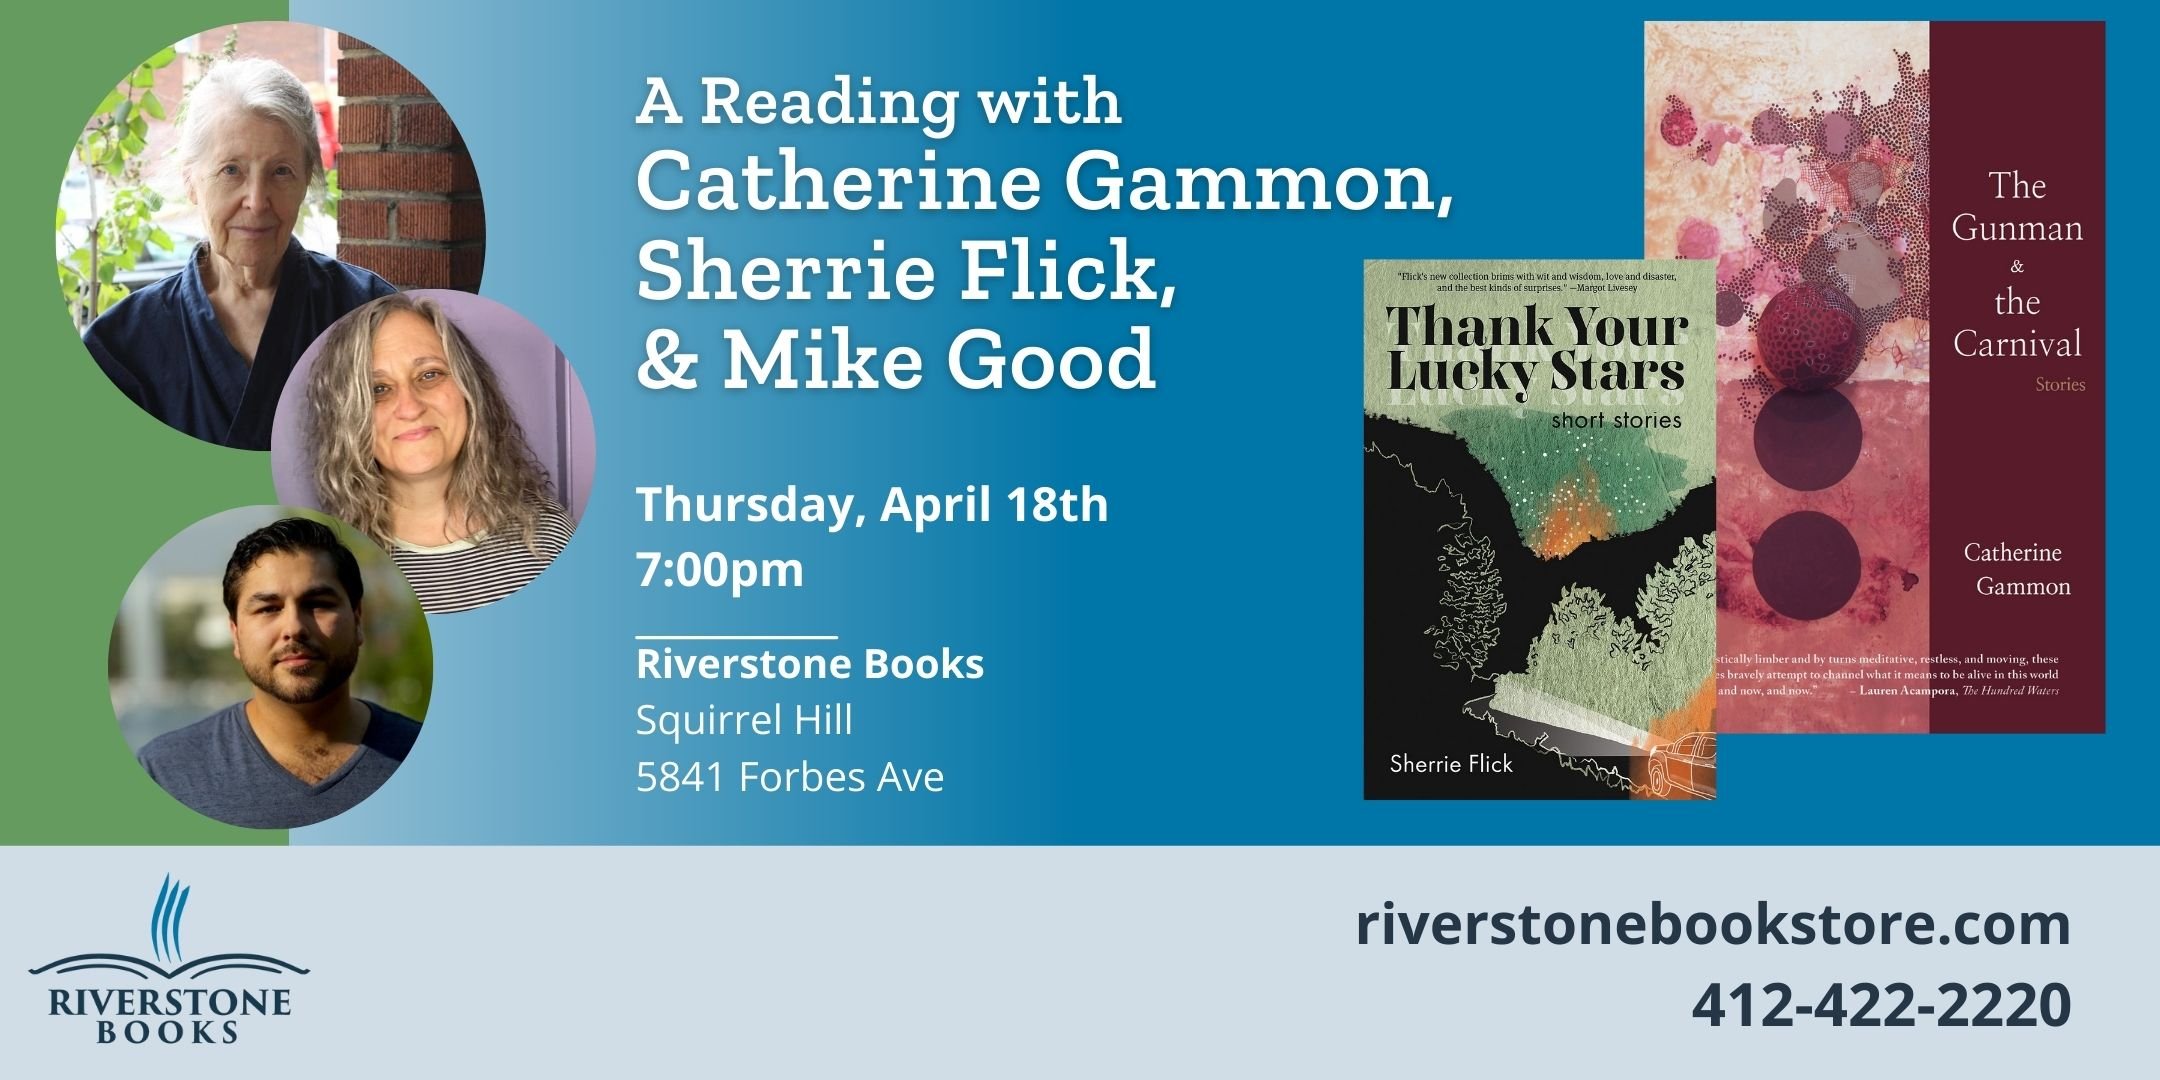 A Reading with Catherine Gammon, Sherrie Flick & Mike Good